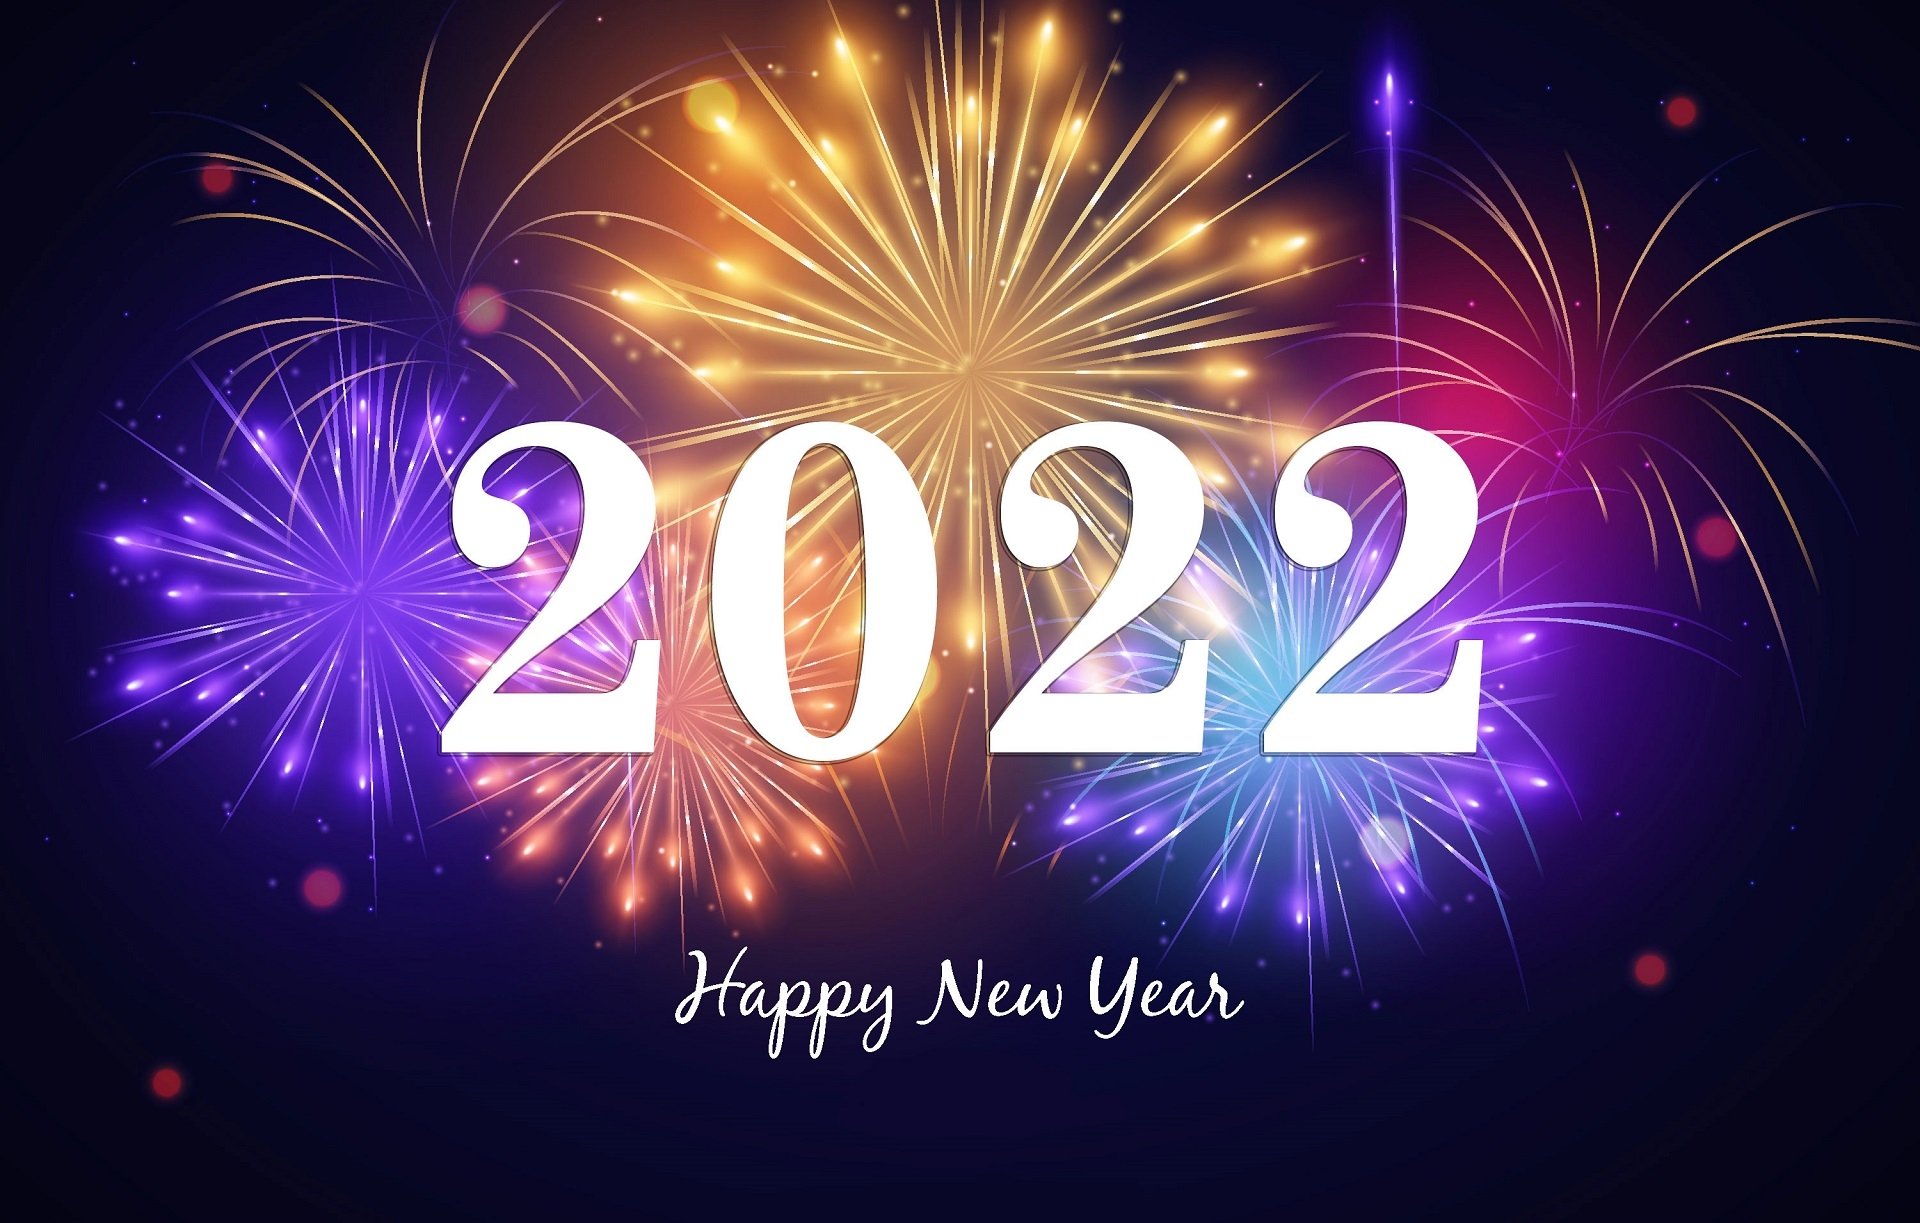 New Year HD Wallpaper Background Image